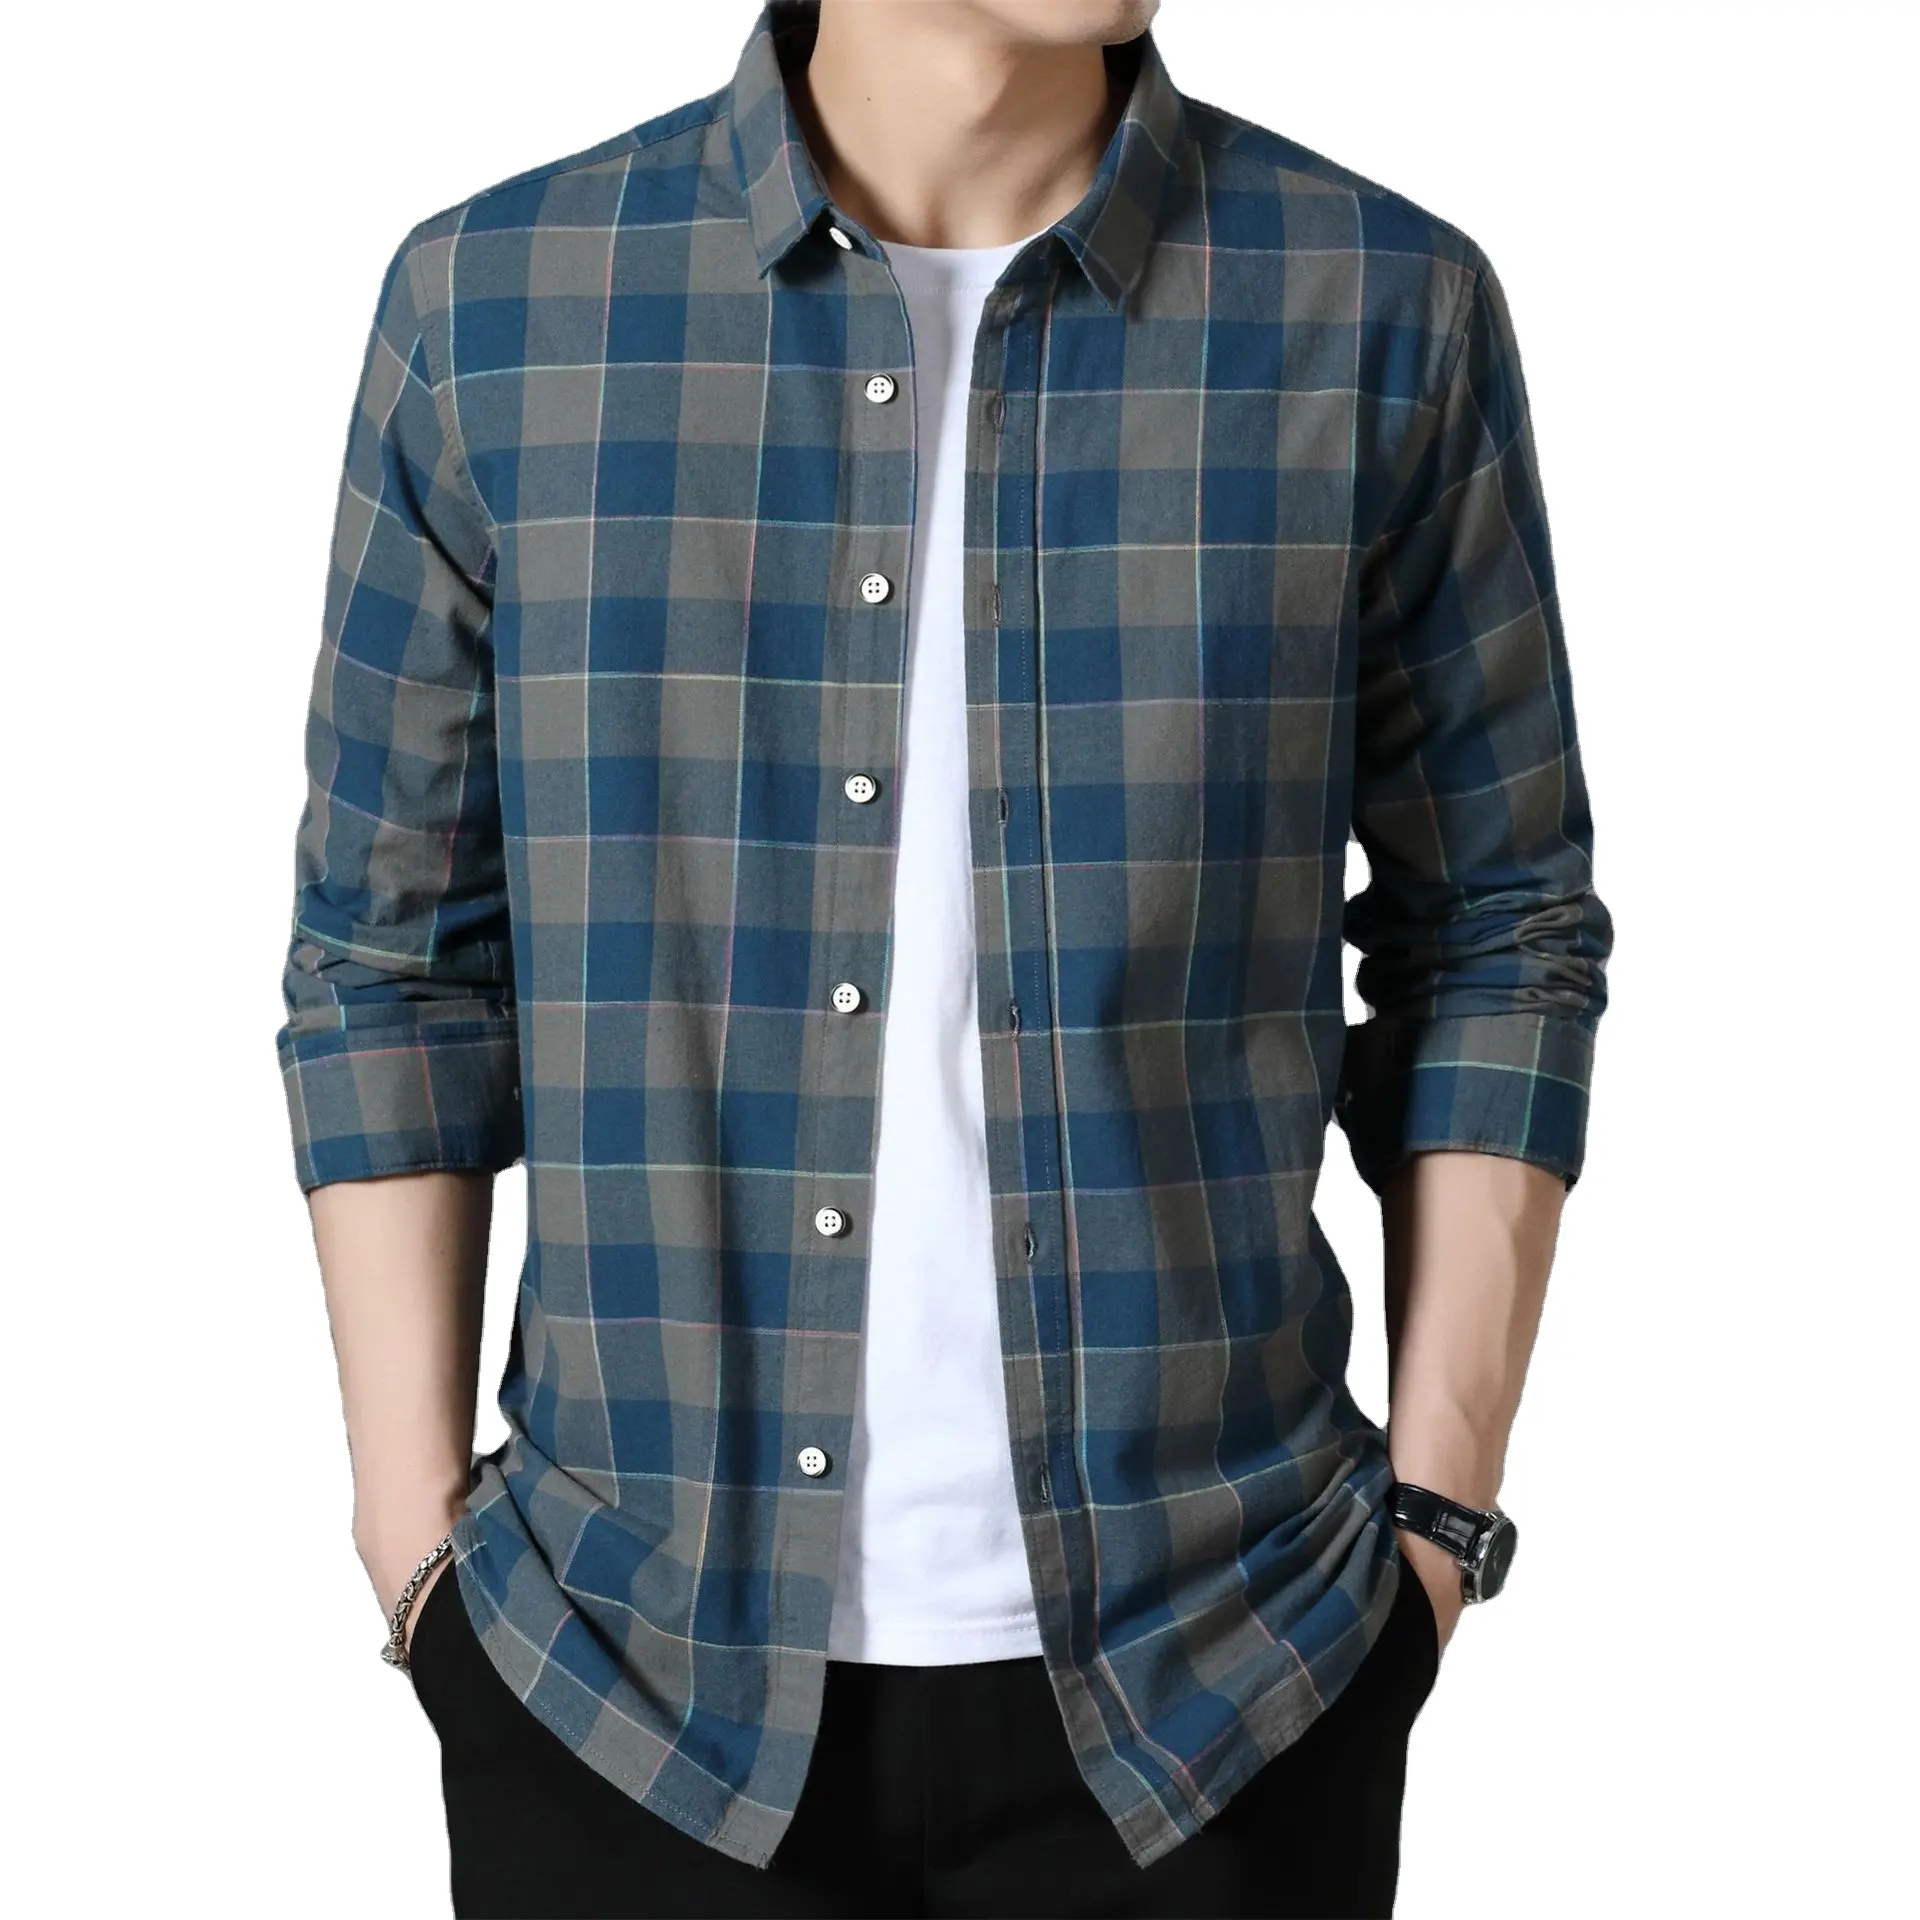 New style plaid long-sleeved men's shirt casual young and middle-aged slim fashion shirts cardigan Camisas de hombre